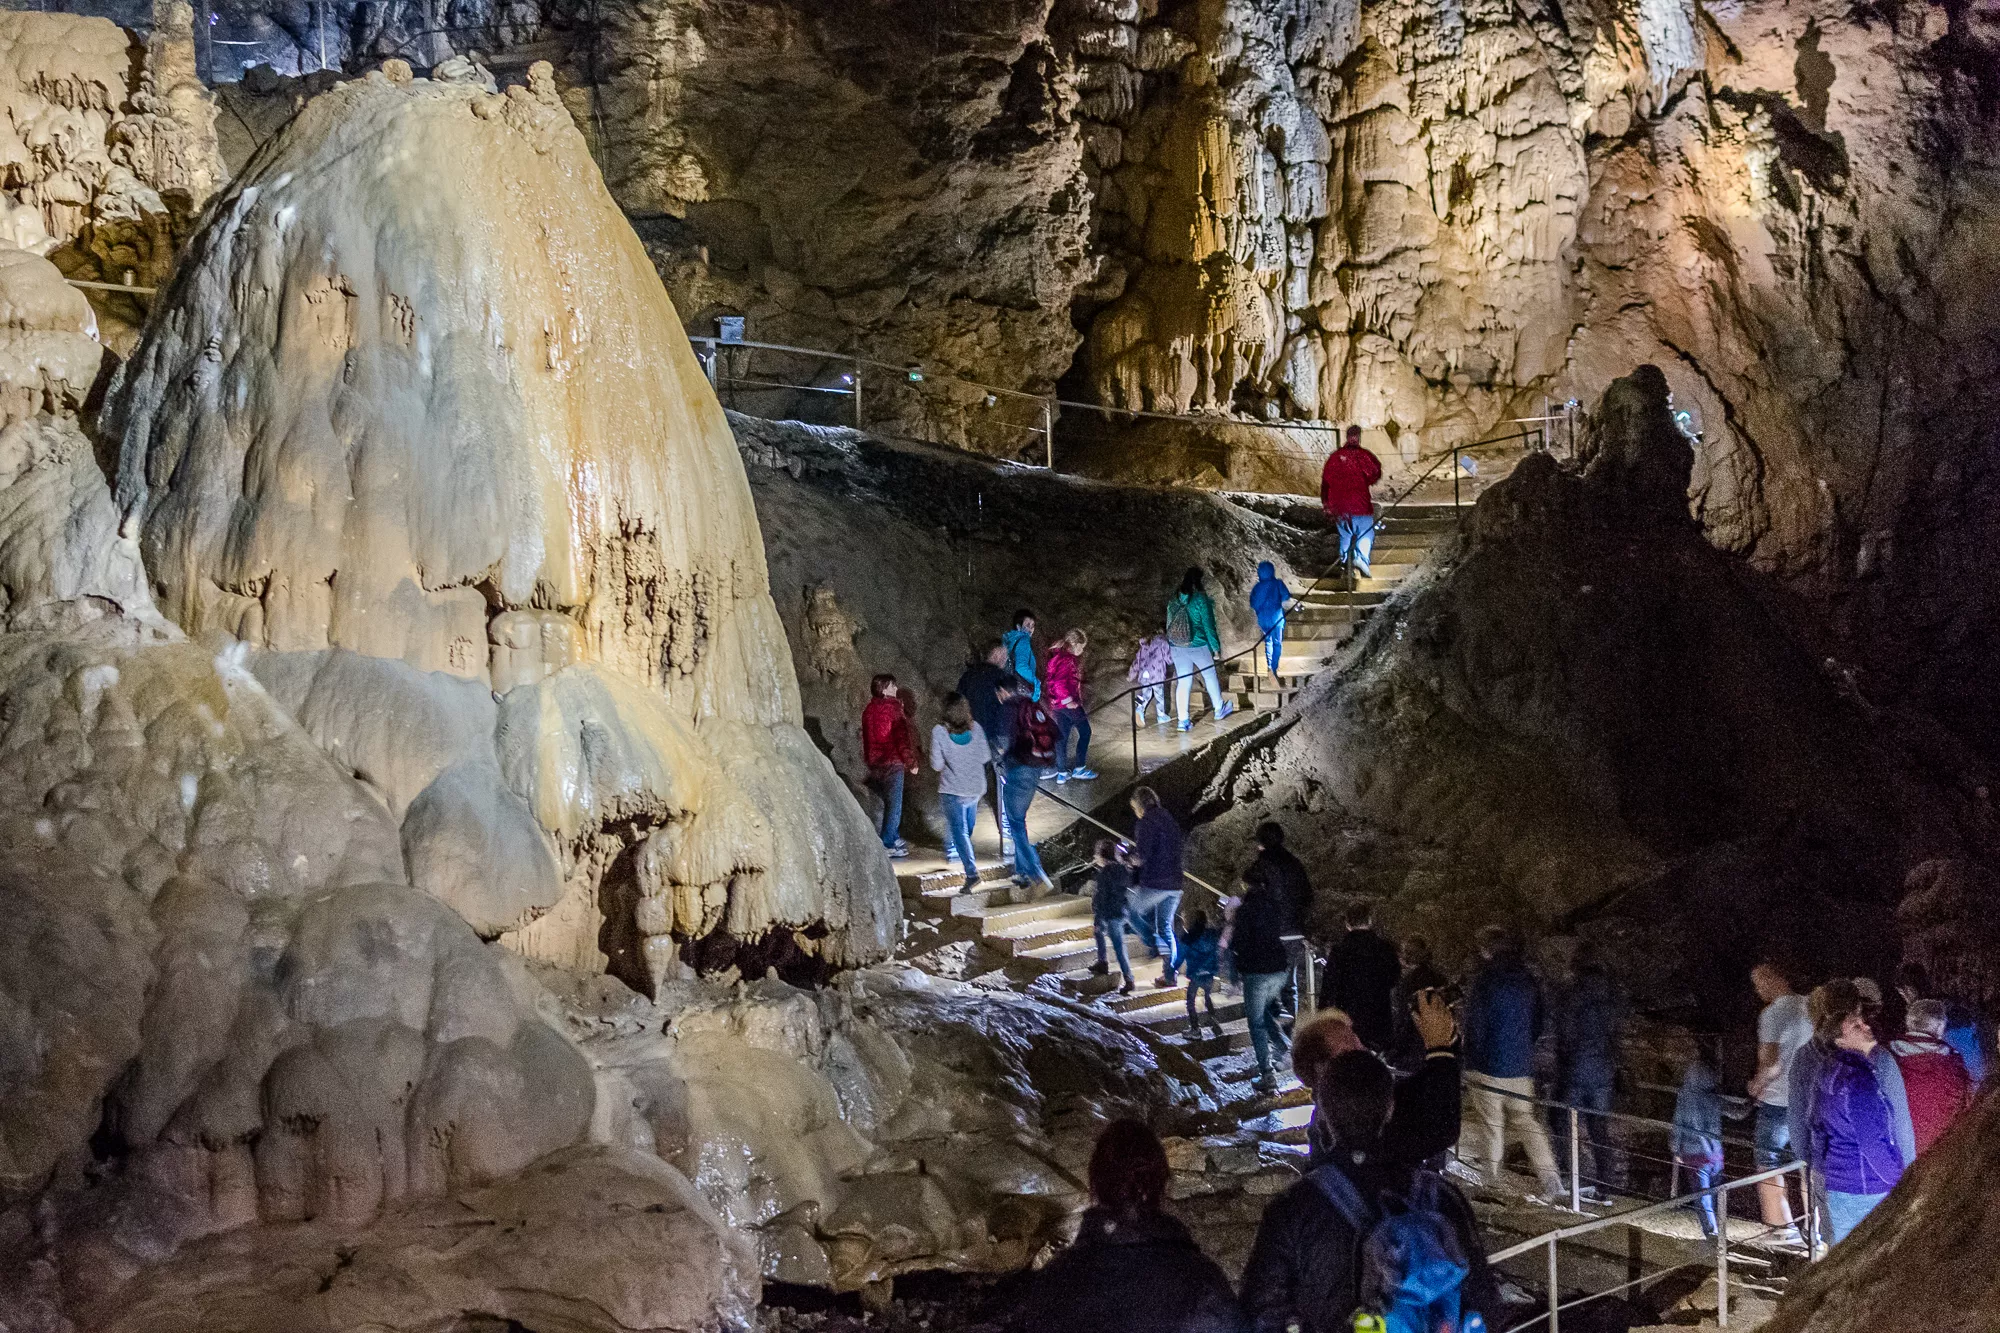 Lurgrotte in Austria, Europe | Caves & Underground Places - Rated 4